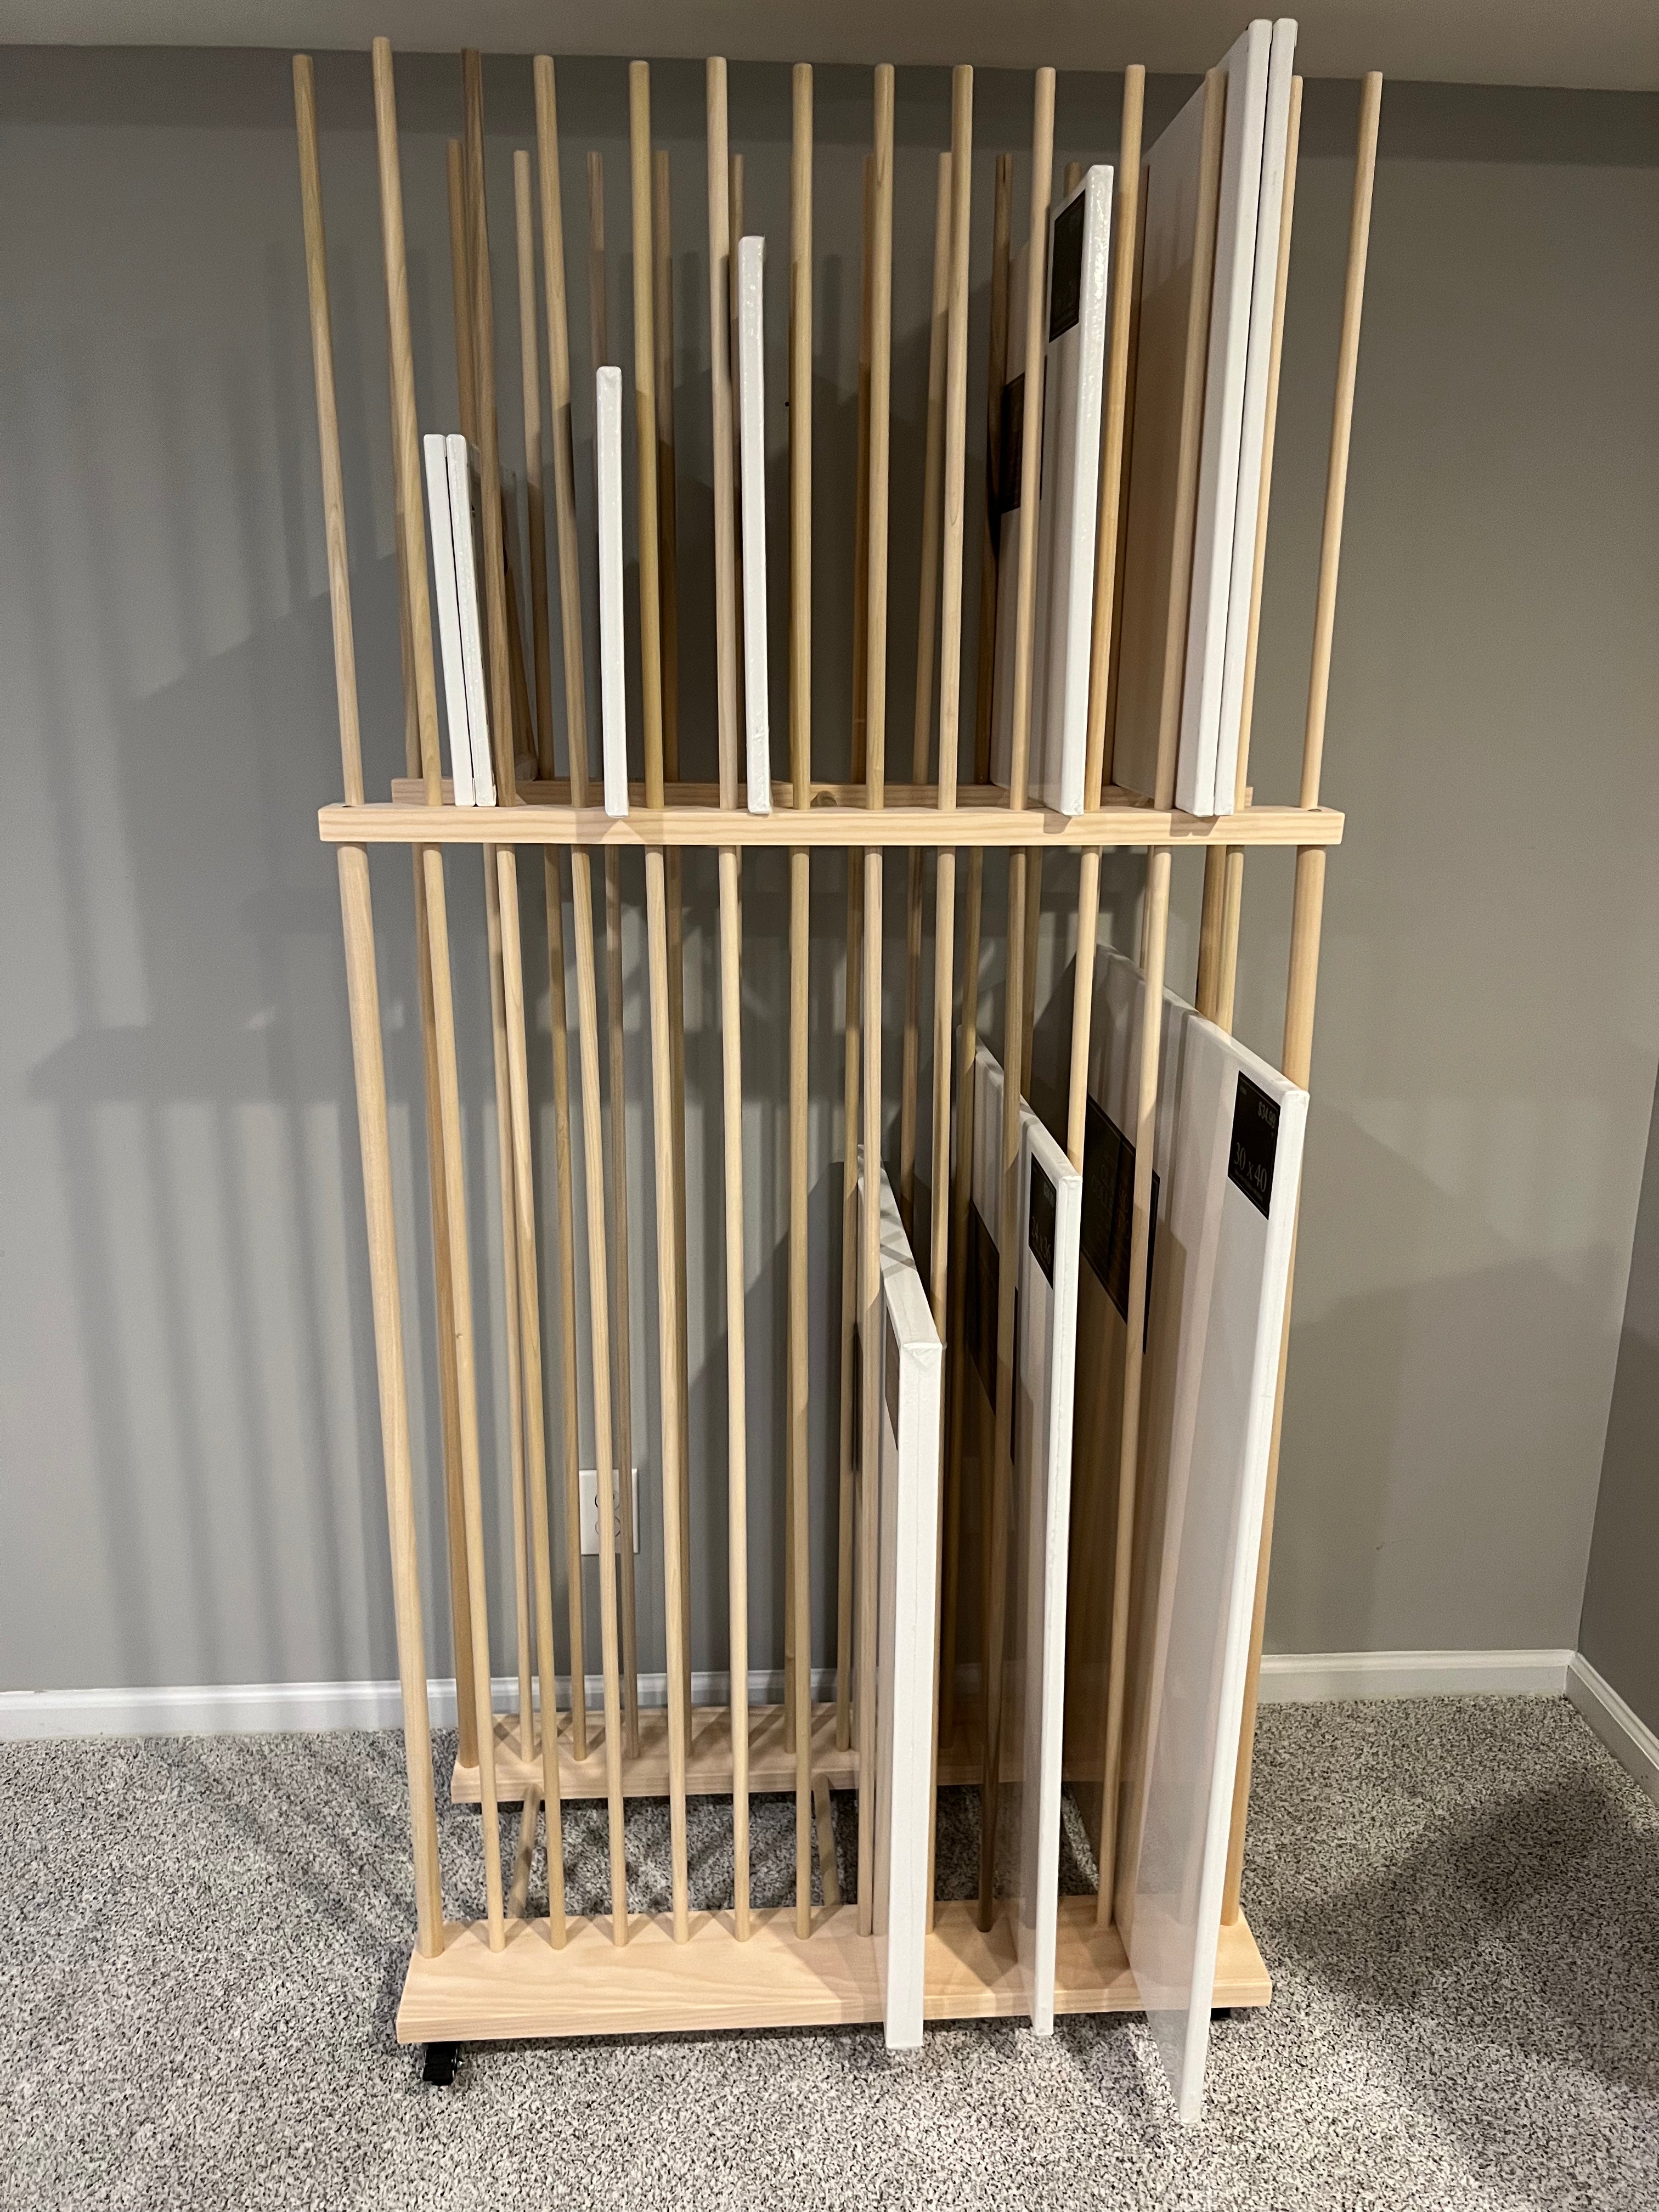 Adjustable Art Storage Rack - 24” long x 11” wide with 24” tall dowels -  Art Canvas Storage